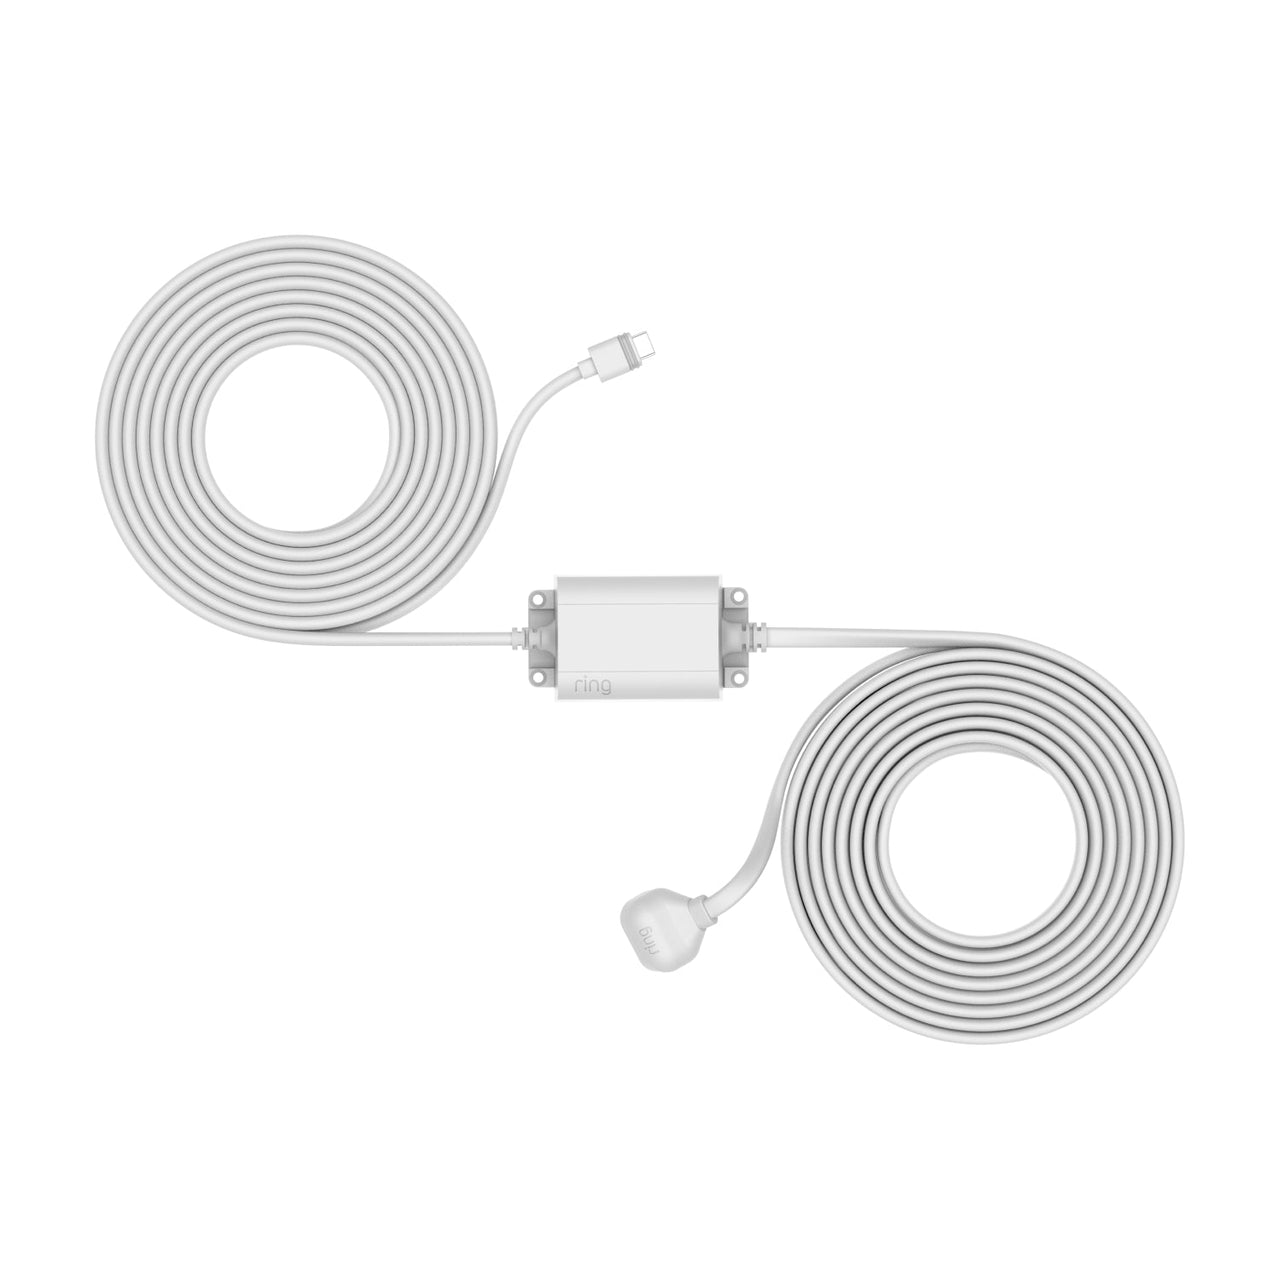 products/ring_indoor_outdoor_power_adapter_usb-c_assembled_wht_1500x1500_1_23034cb9-d238-4bc4-9dd5-a73afb94c71e.jpg